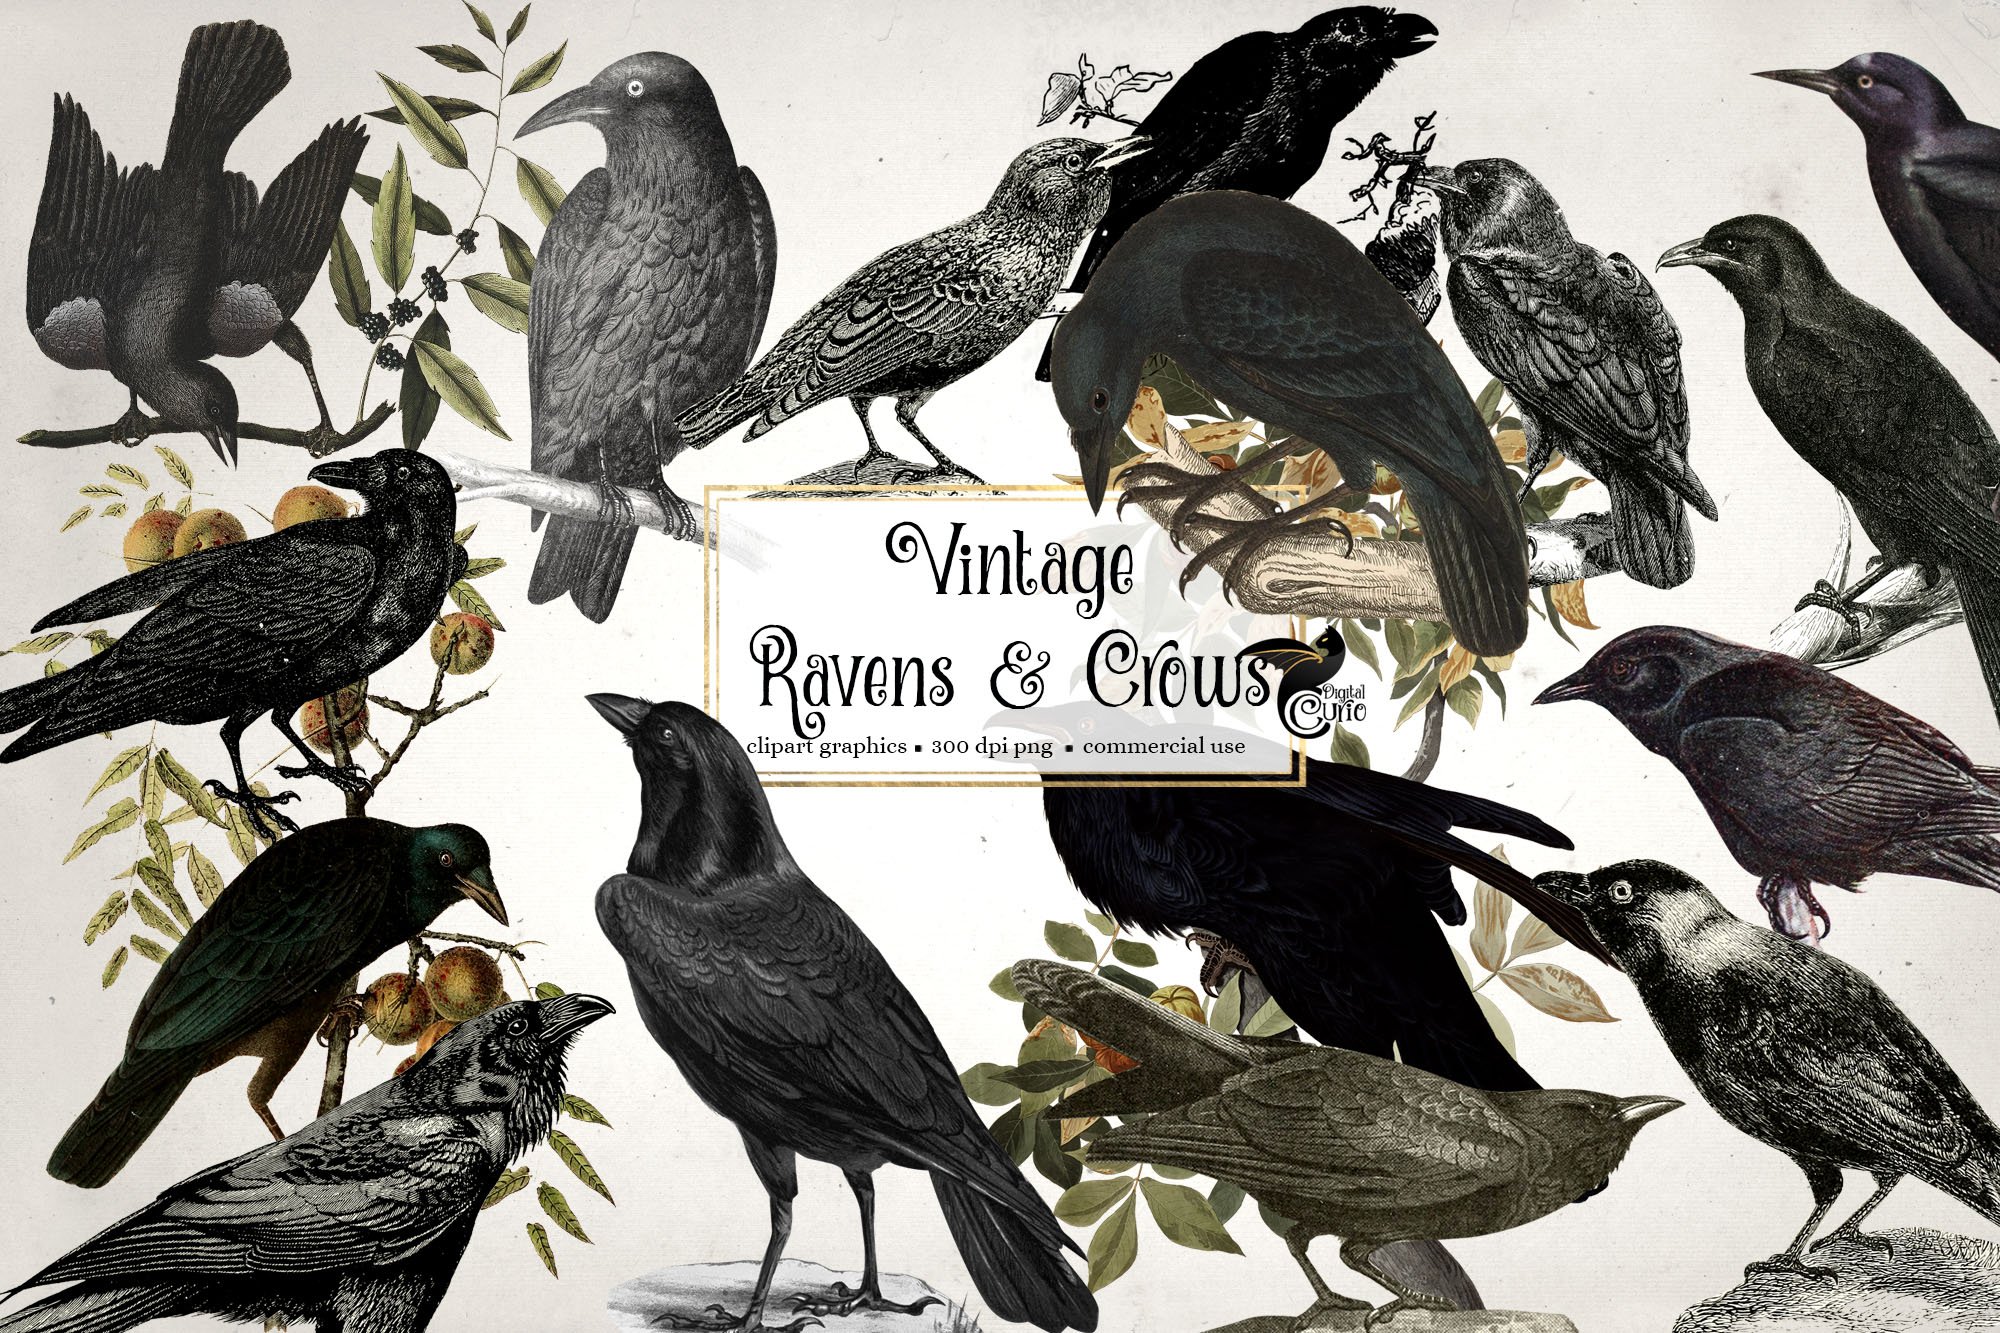 Vintage Ravens and Crows Clipart cover image.